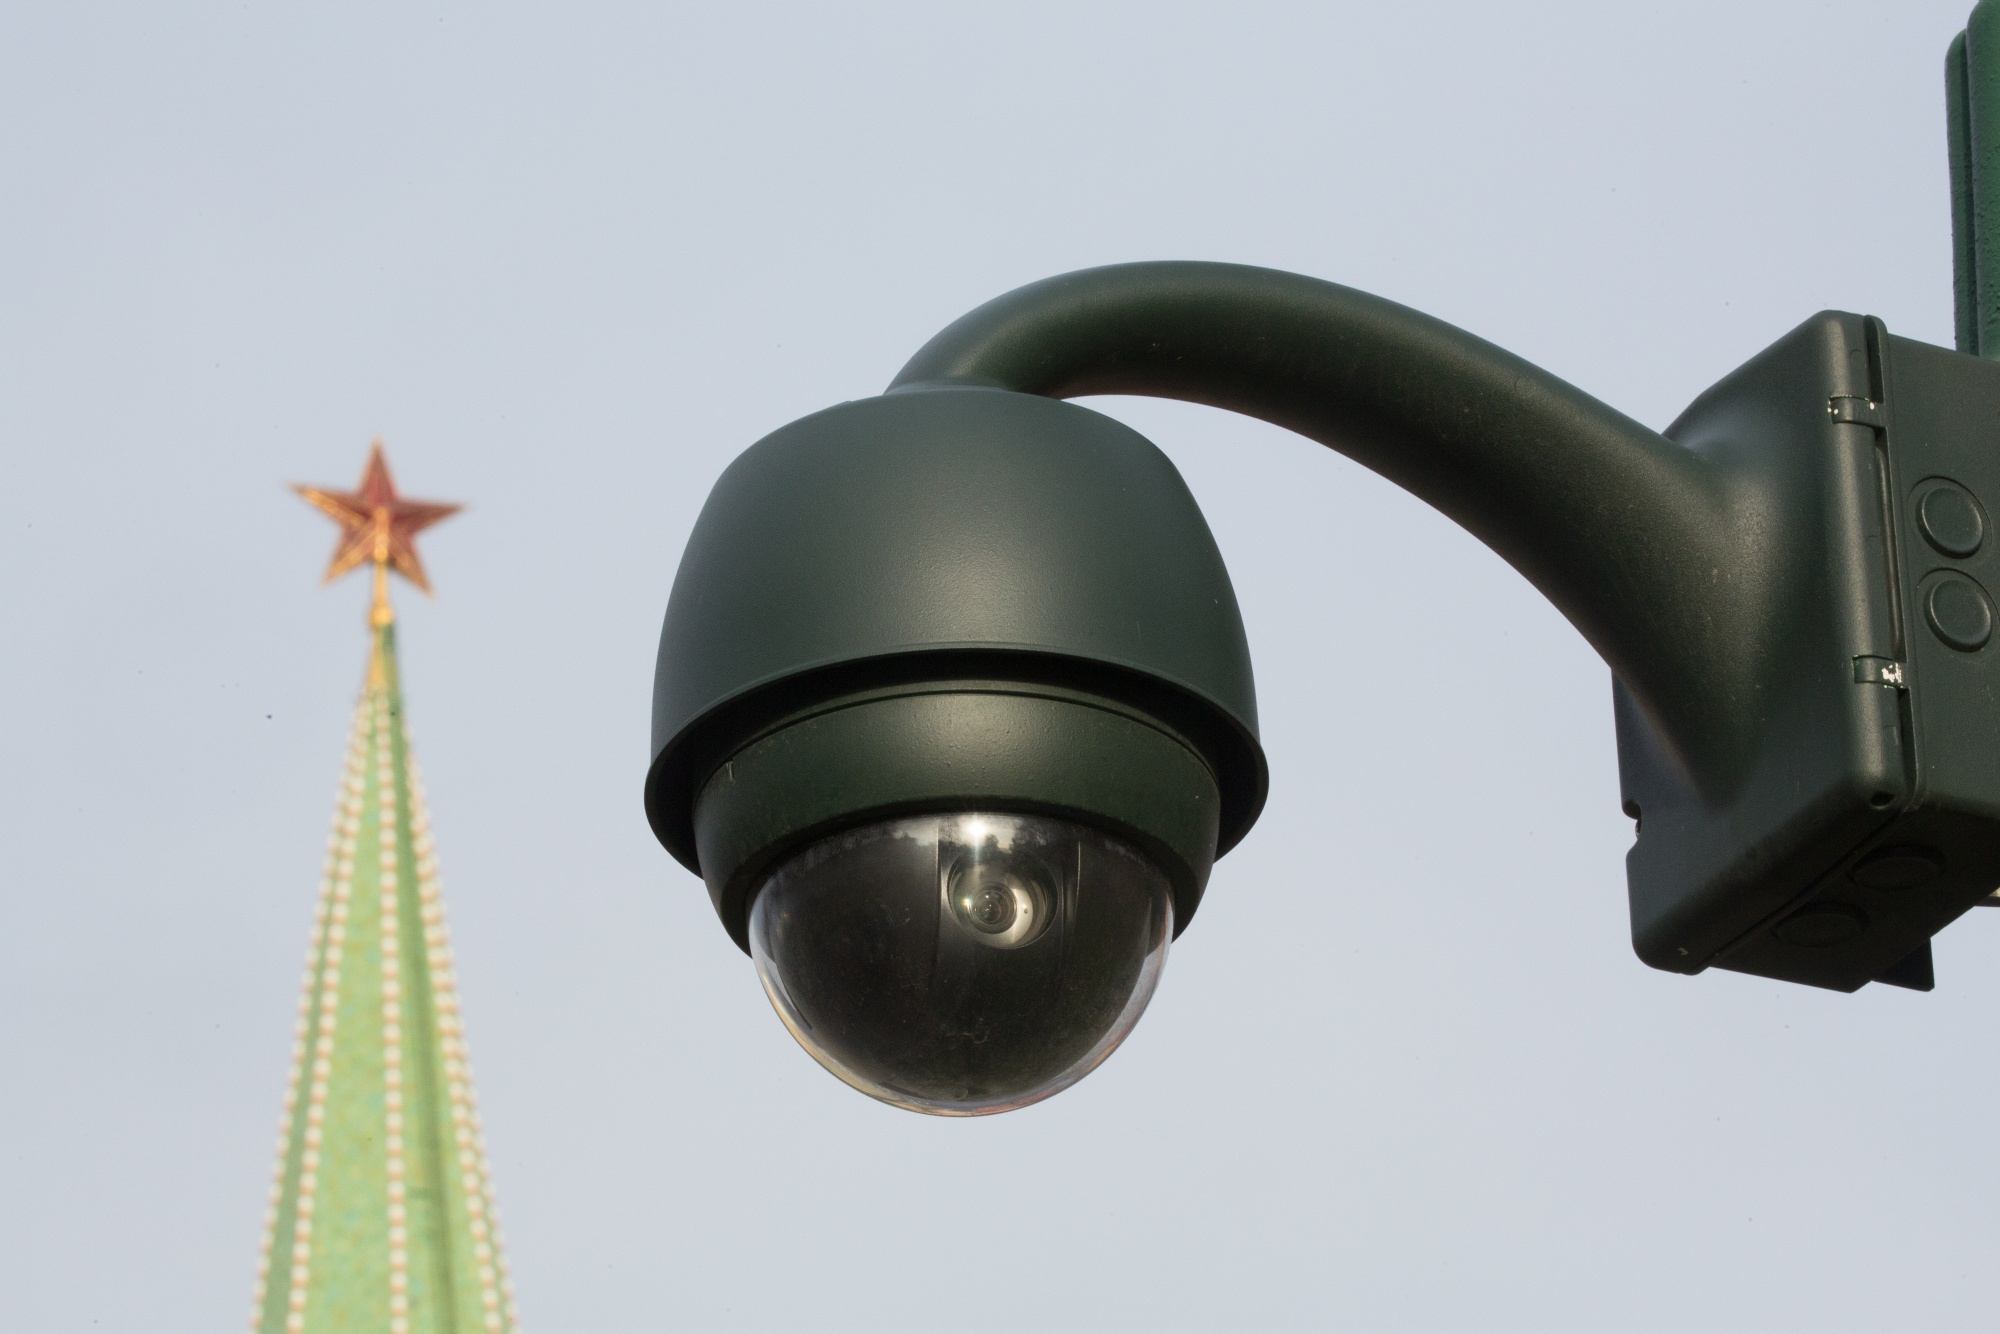 A surveillance camera at Alexander Gardens in central Moscow as the Spasskaya tower of the Kremlin stands beyond in November 2019.